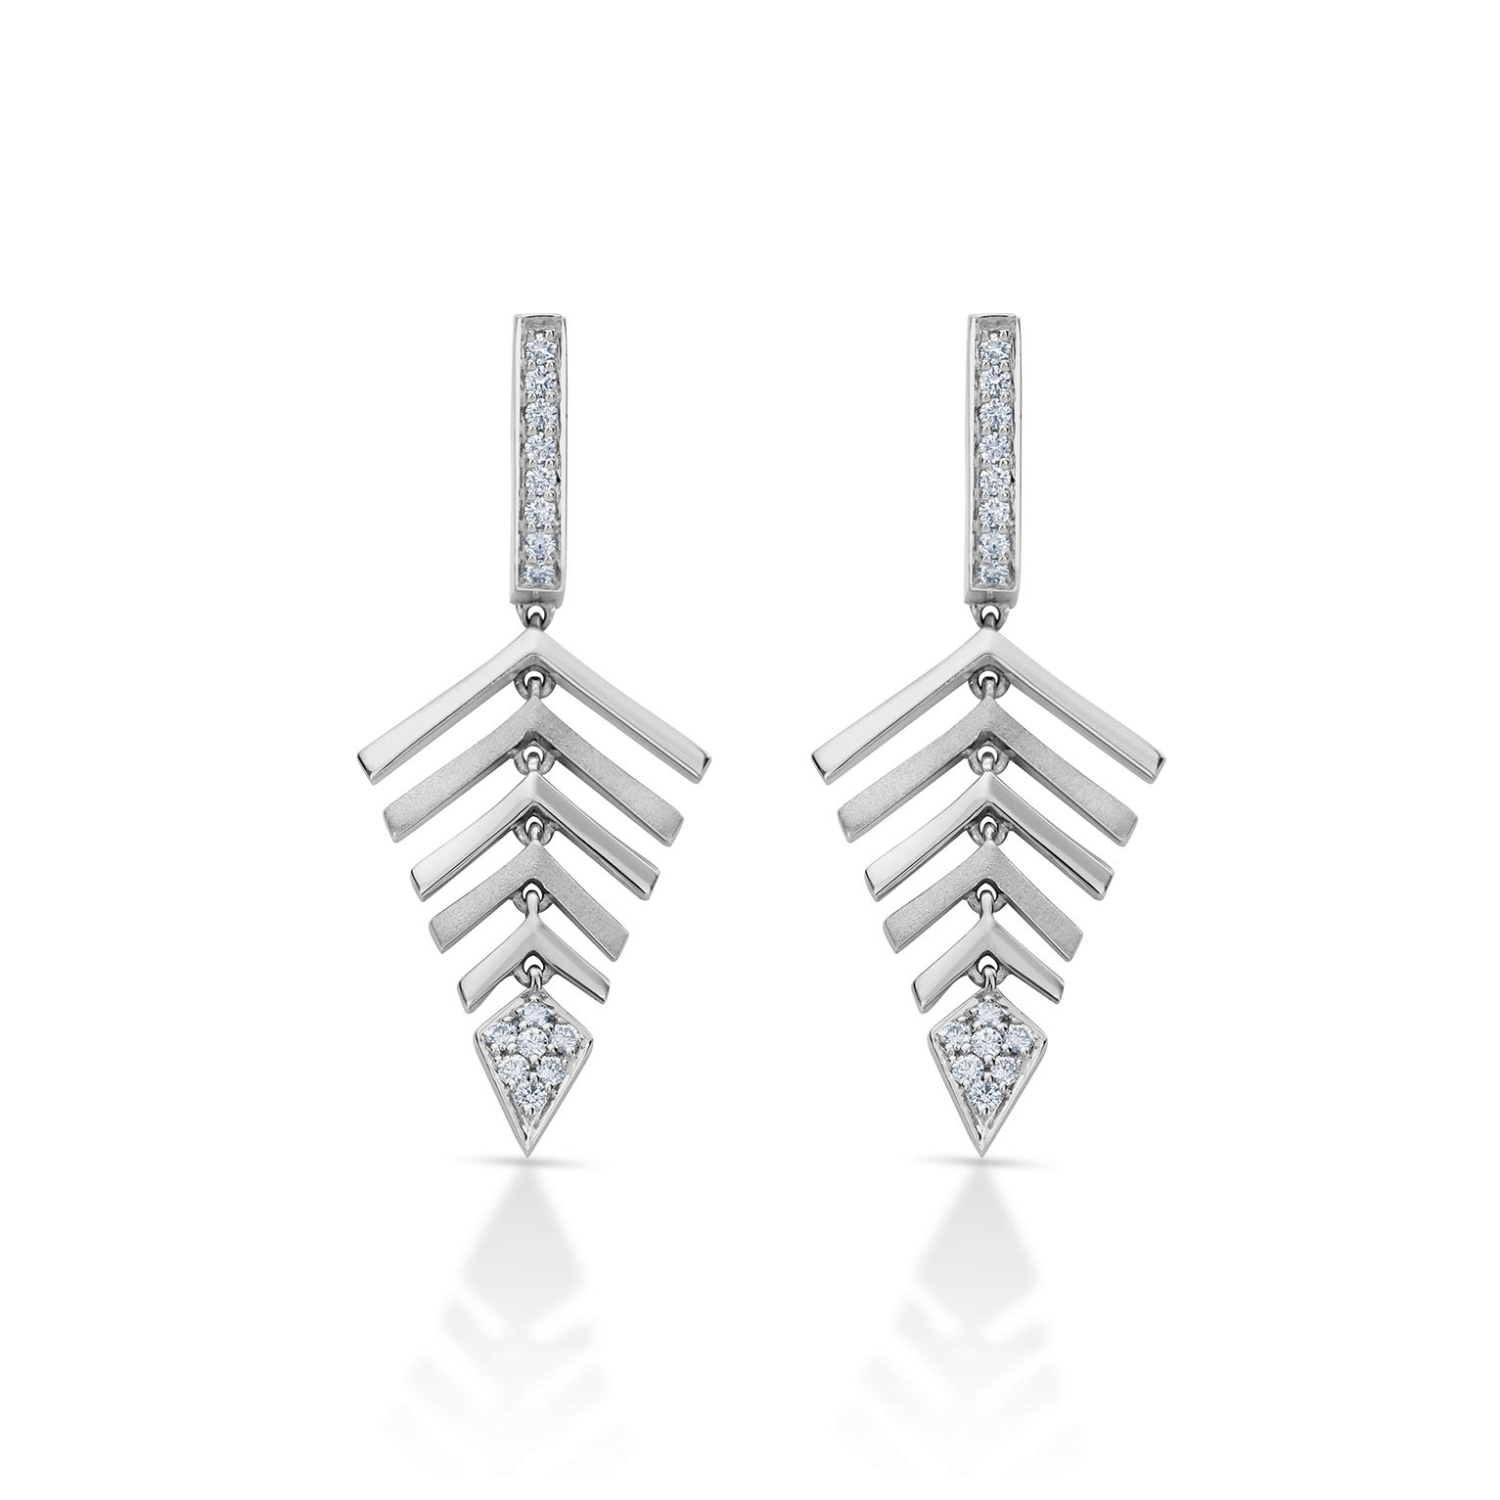 Buy Beautiful Platinum Earrings With Diamonds for Women JL PT E ST 2103  Online in India - Etsy